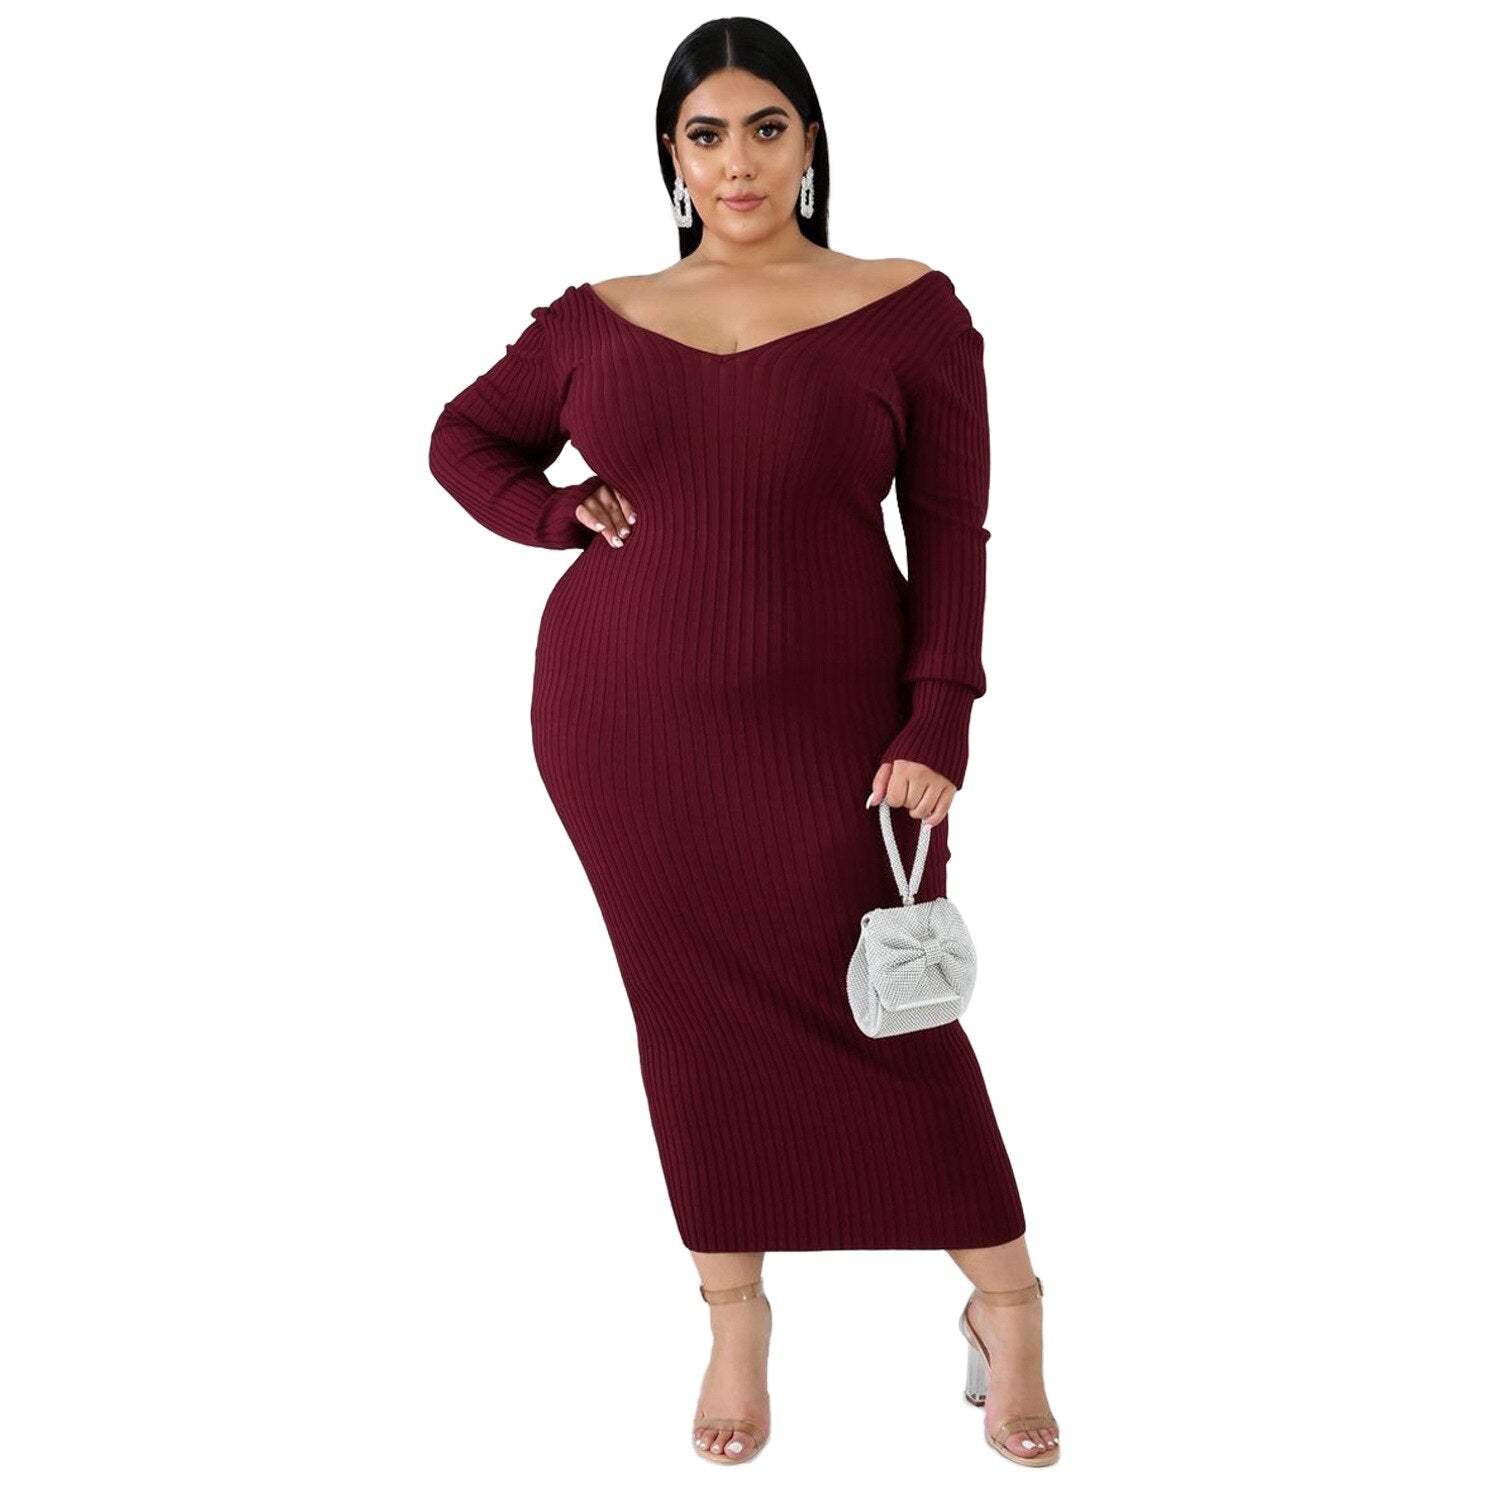 Aovica Rib Sunken Stripe Knitted Cotton Dress Solid Color Women Casual Plus Size Dresses Fashion Autumn Winter Long Clothes 2022